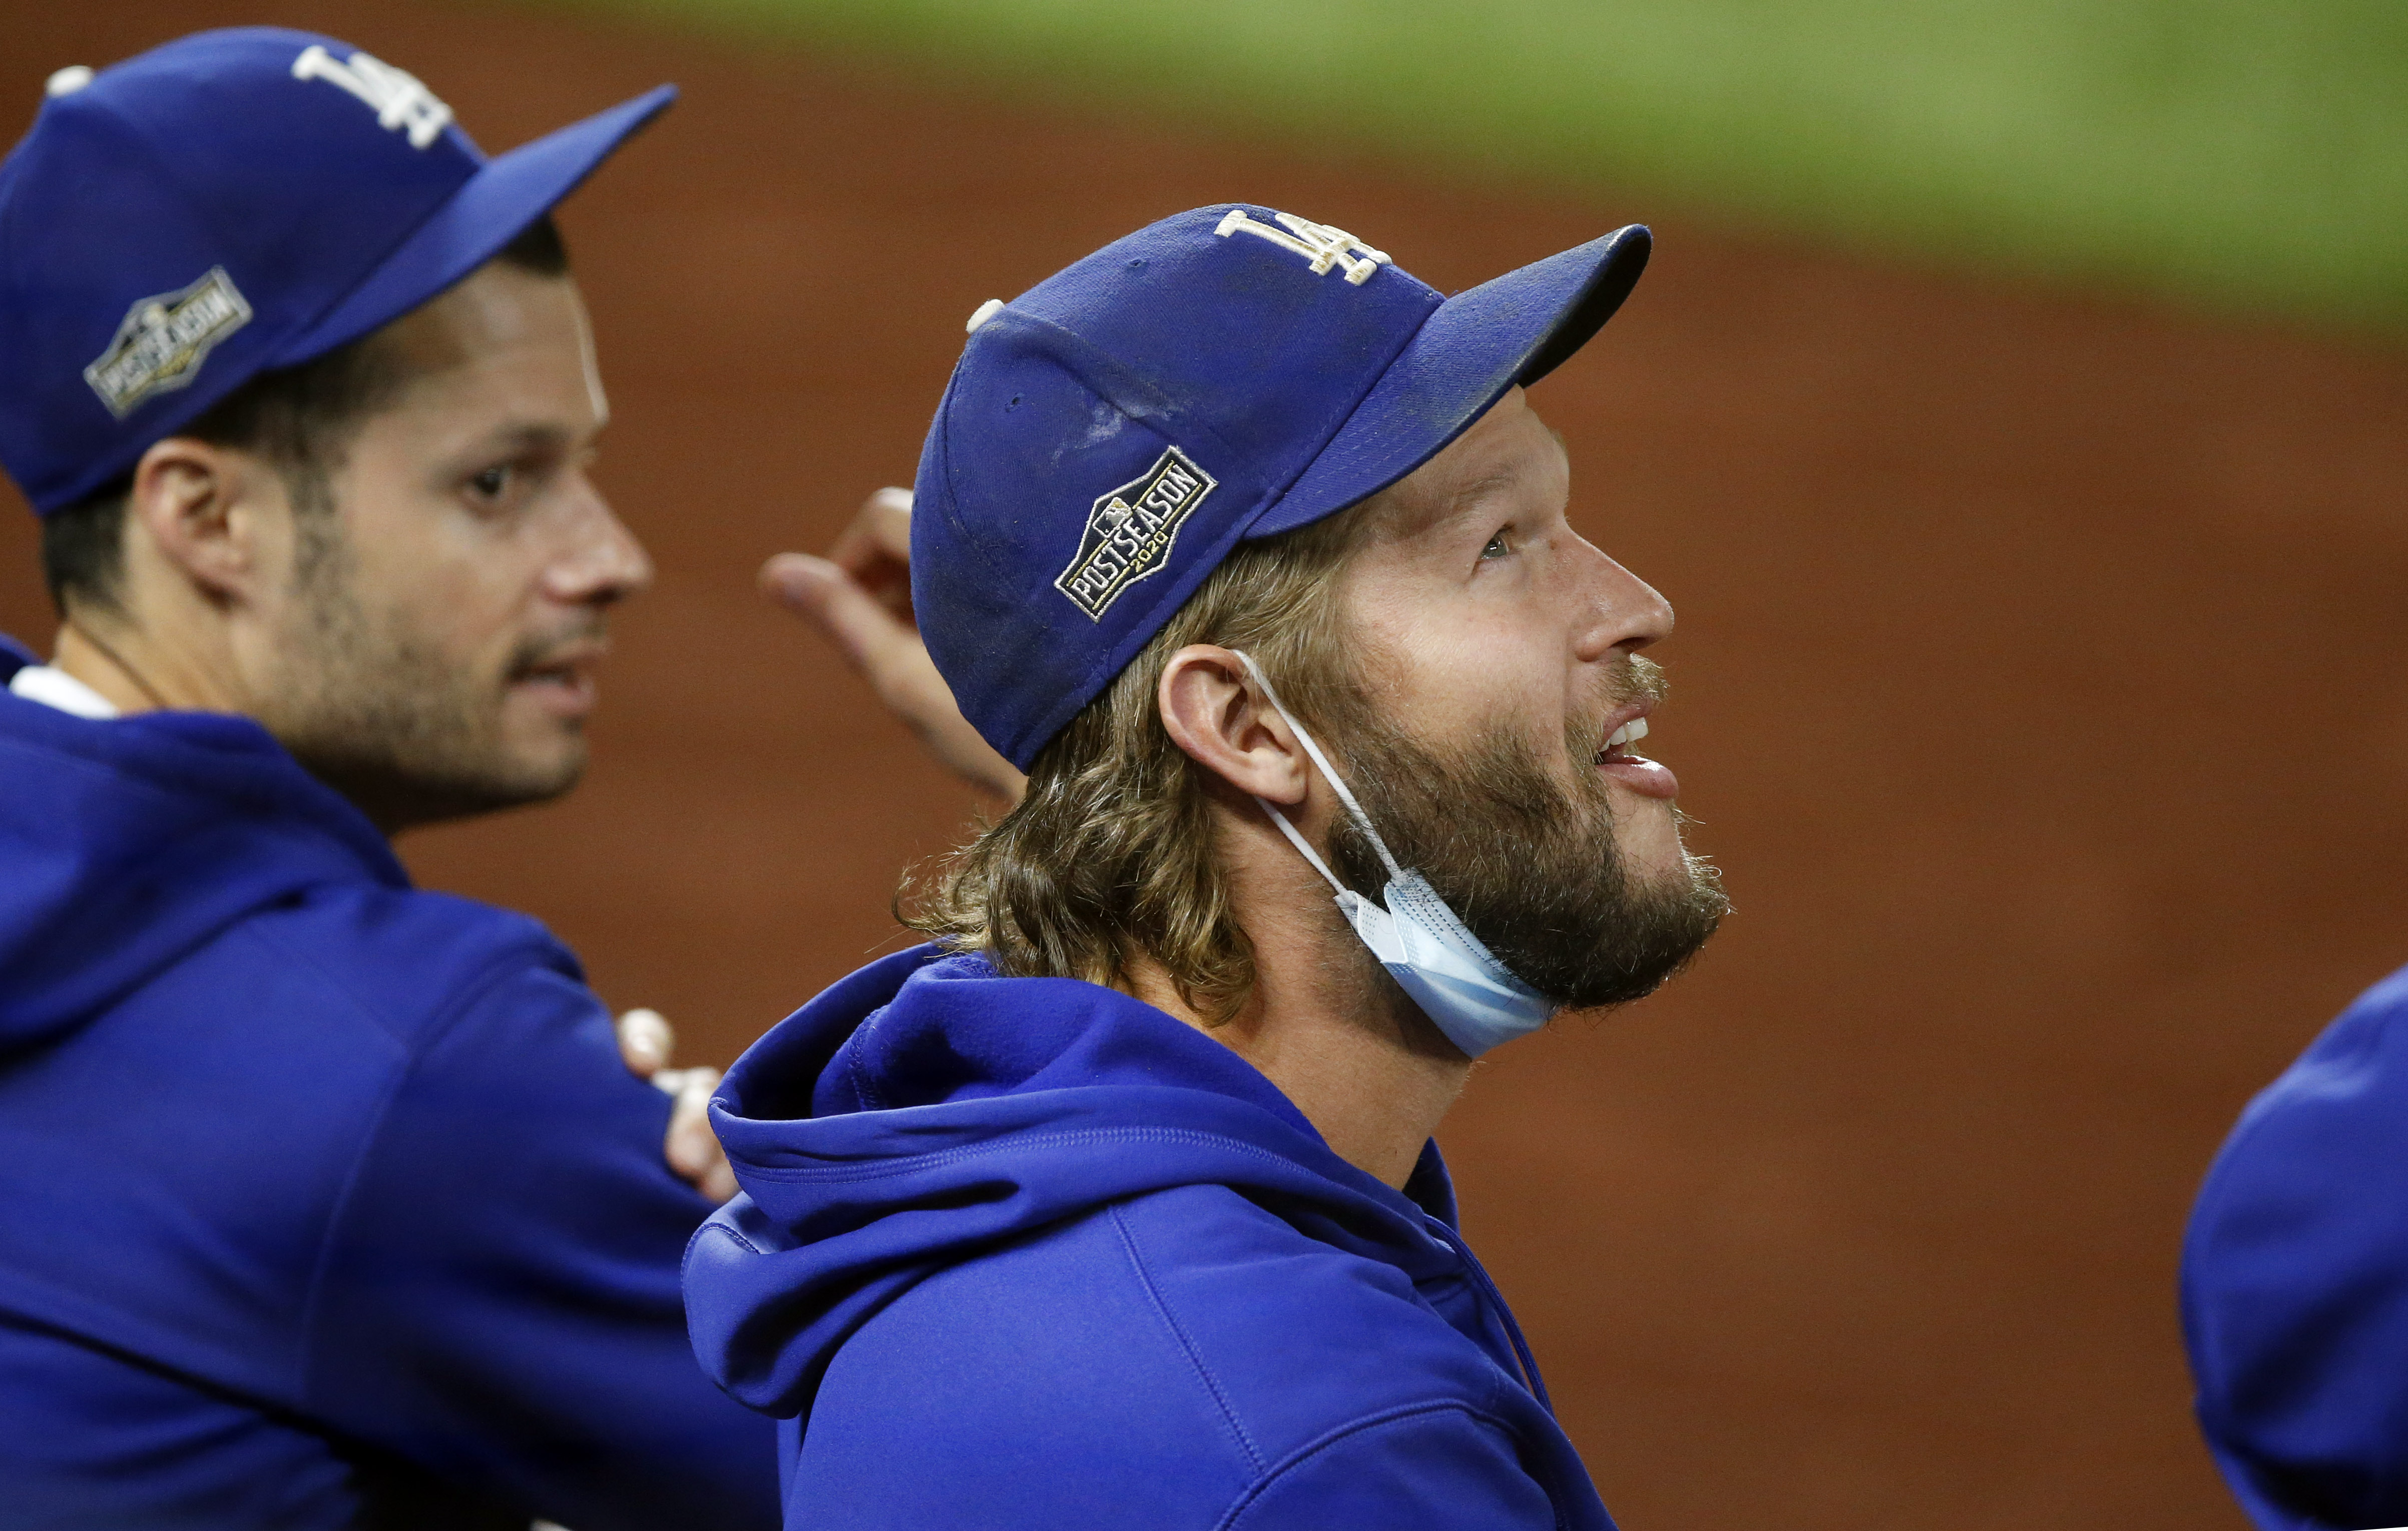 Dodgers believe Padres will turn it around. Even Clayton Kershaw